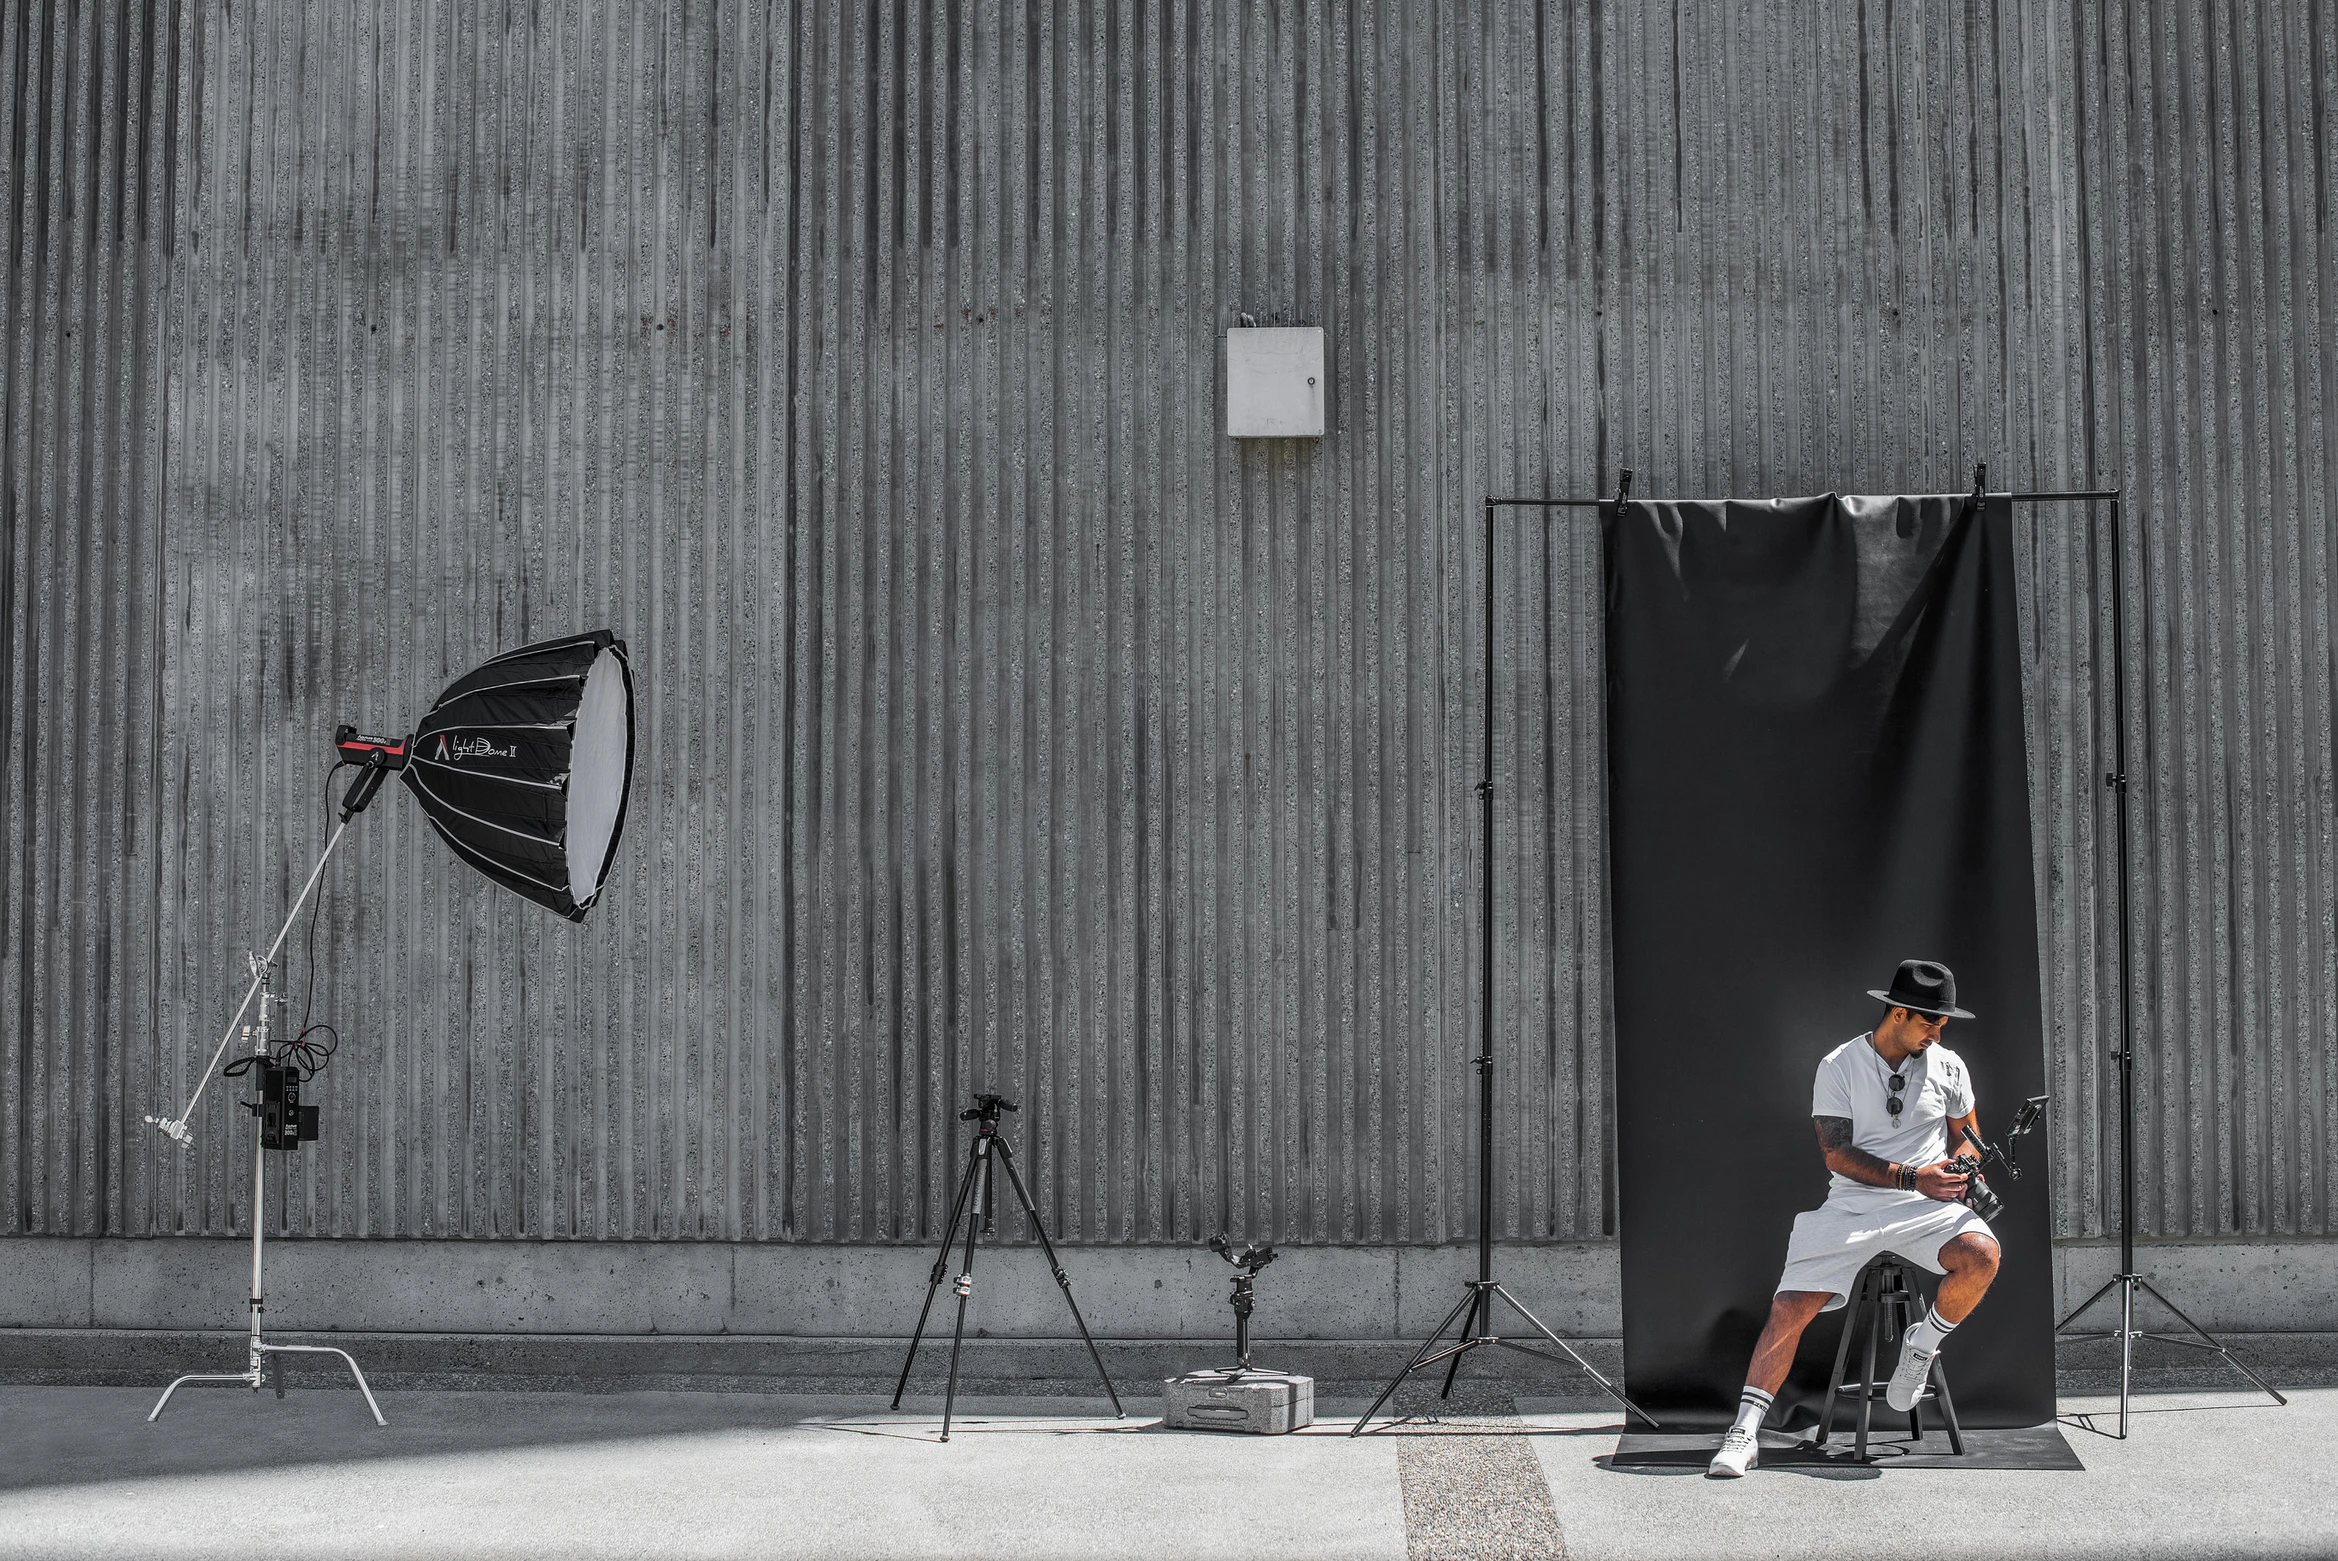 6 Things To Watch For When Planning For A Professional Photoshoot